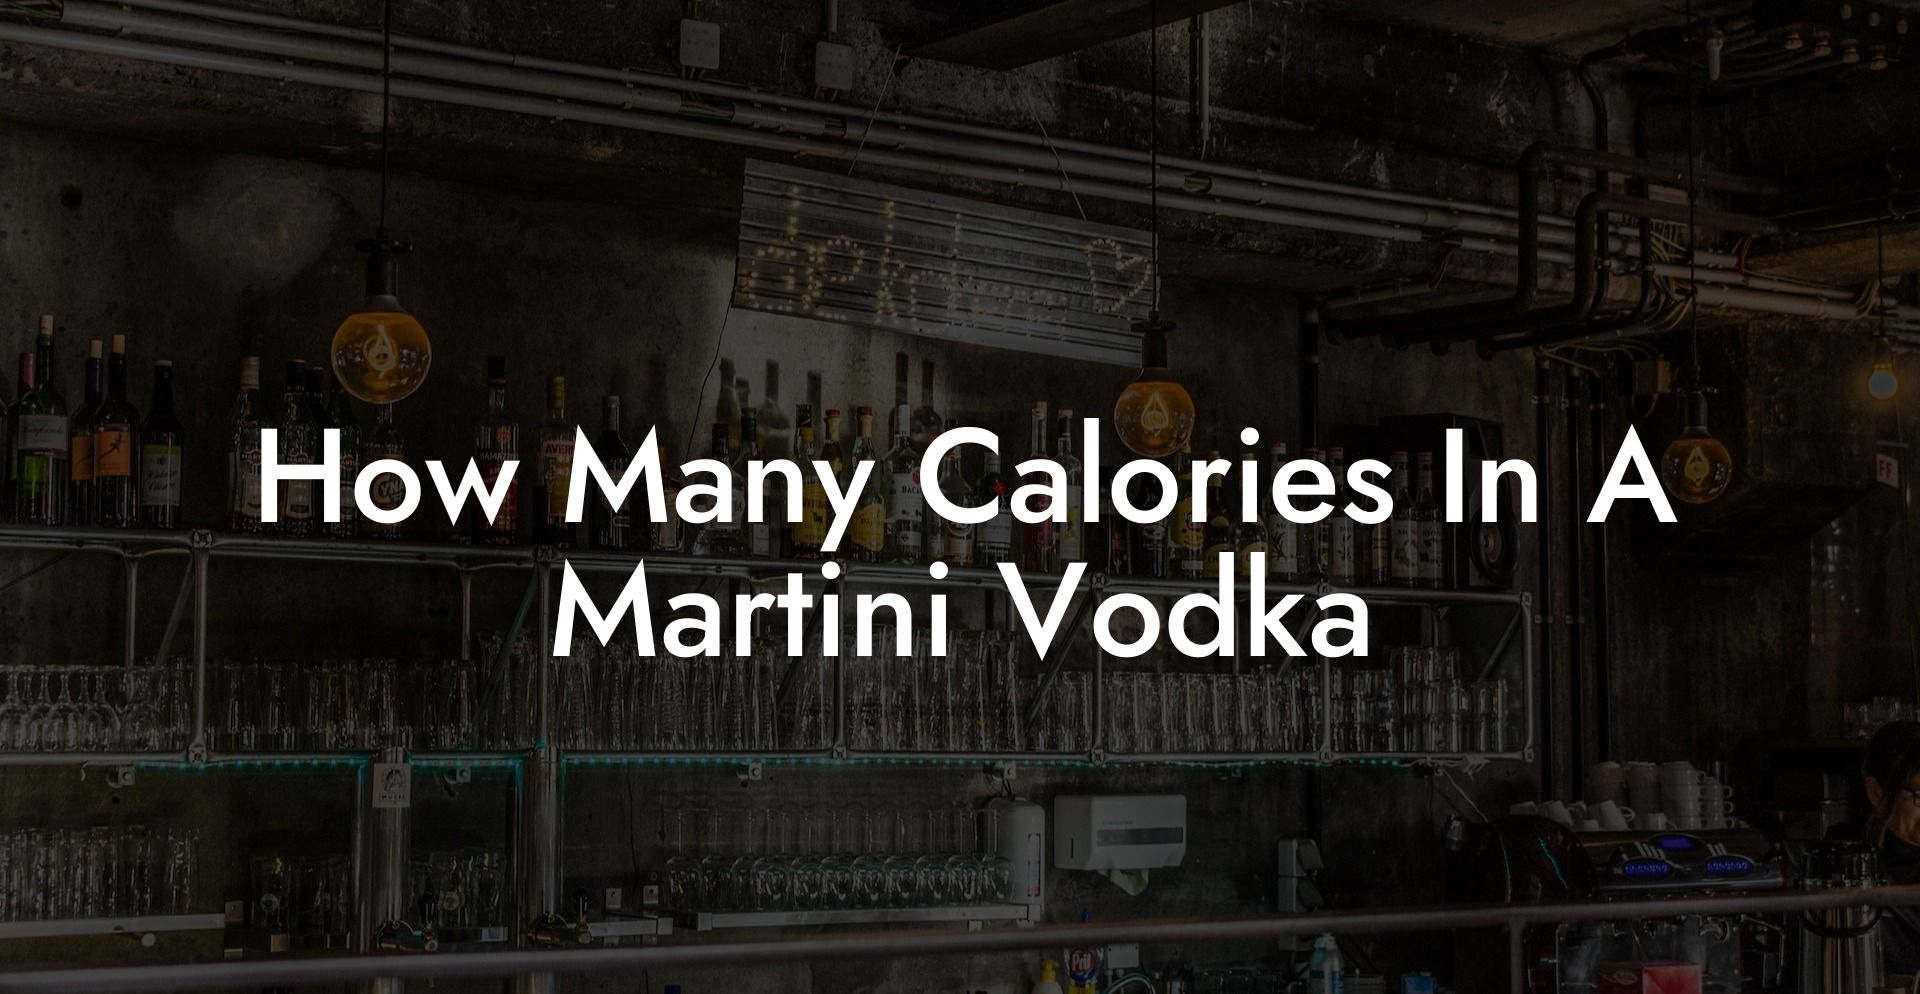 How Many Calories In A Martini Vodka